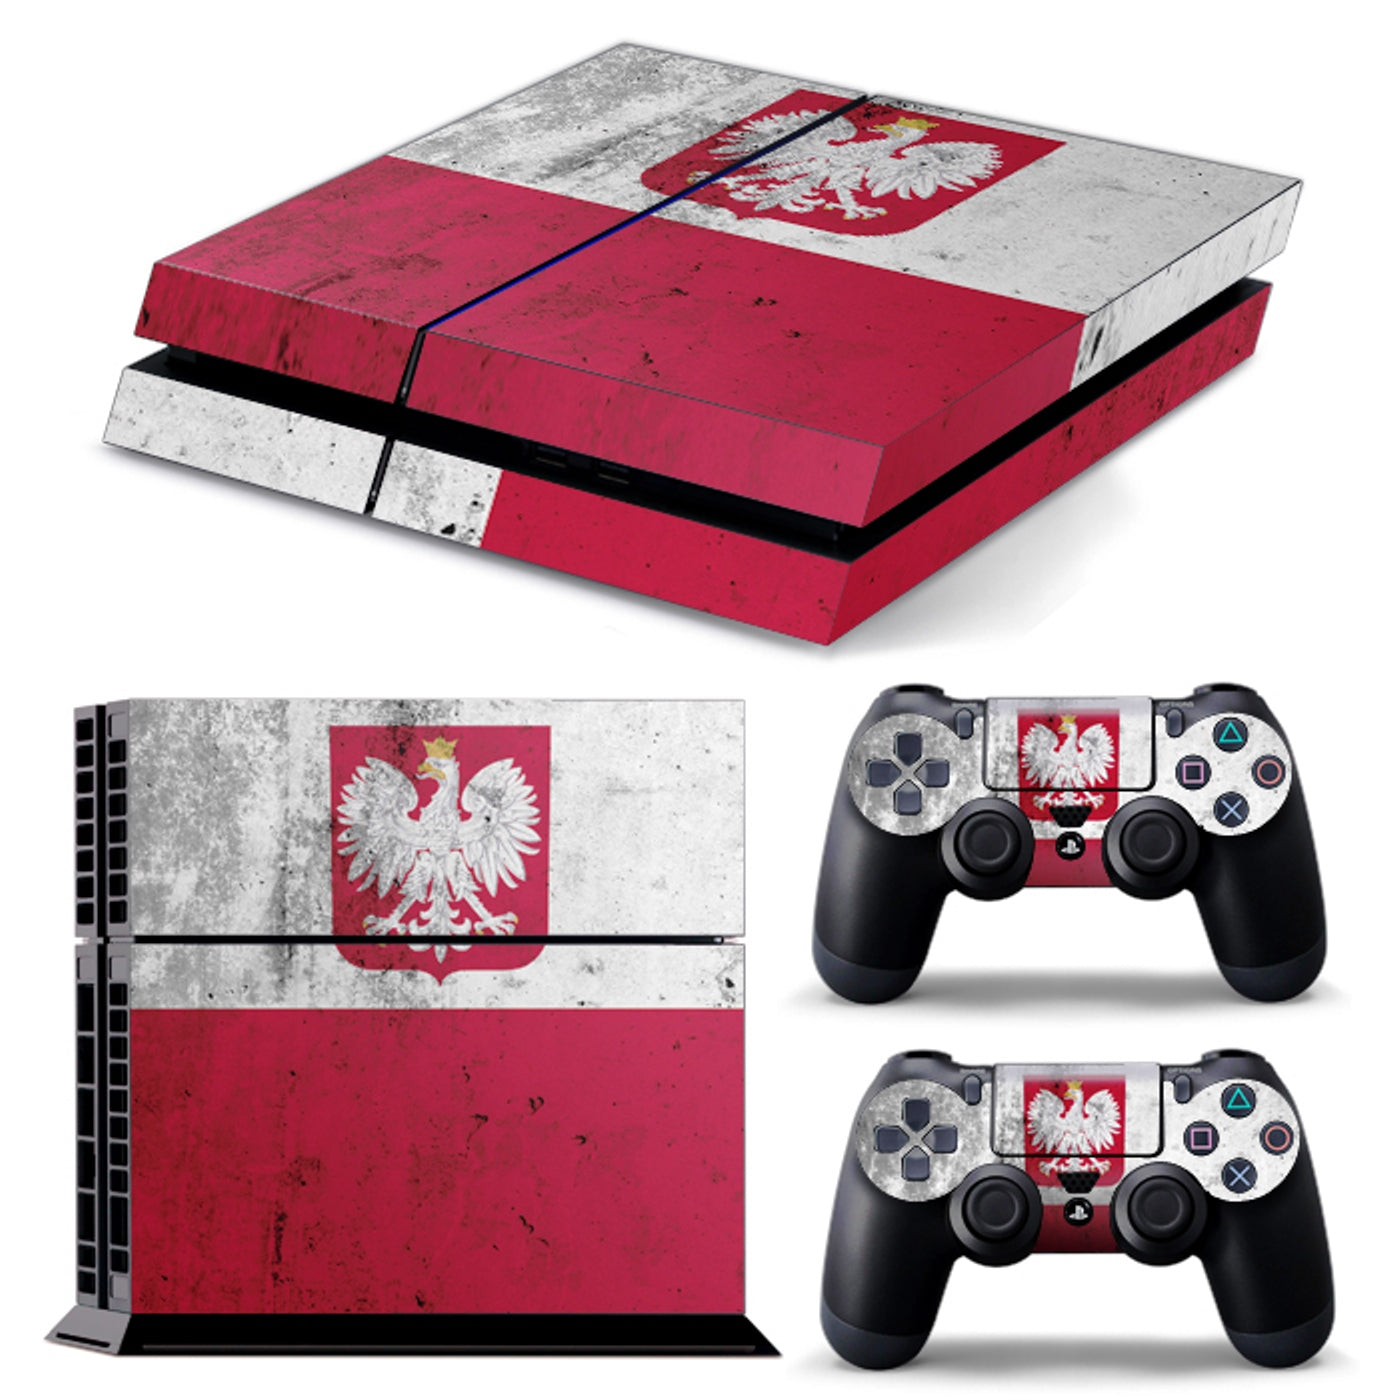 PS4 FULL BODY Accessory Wrap Sticker Skin Cover Decal for PS4 Playstation 4, ***Poland White Red***